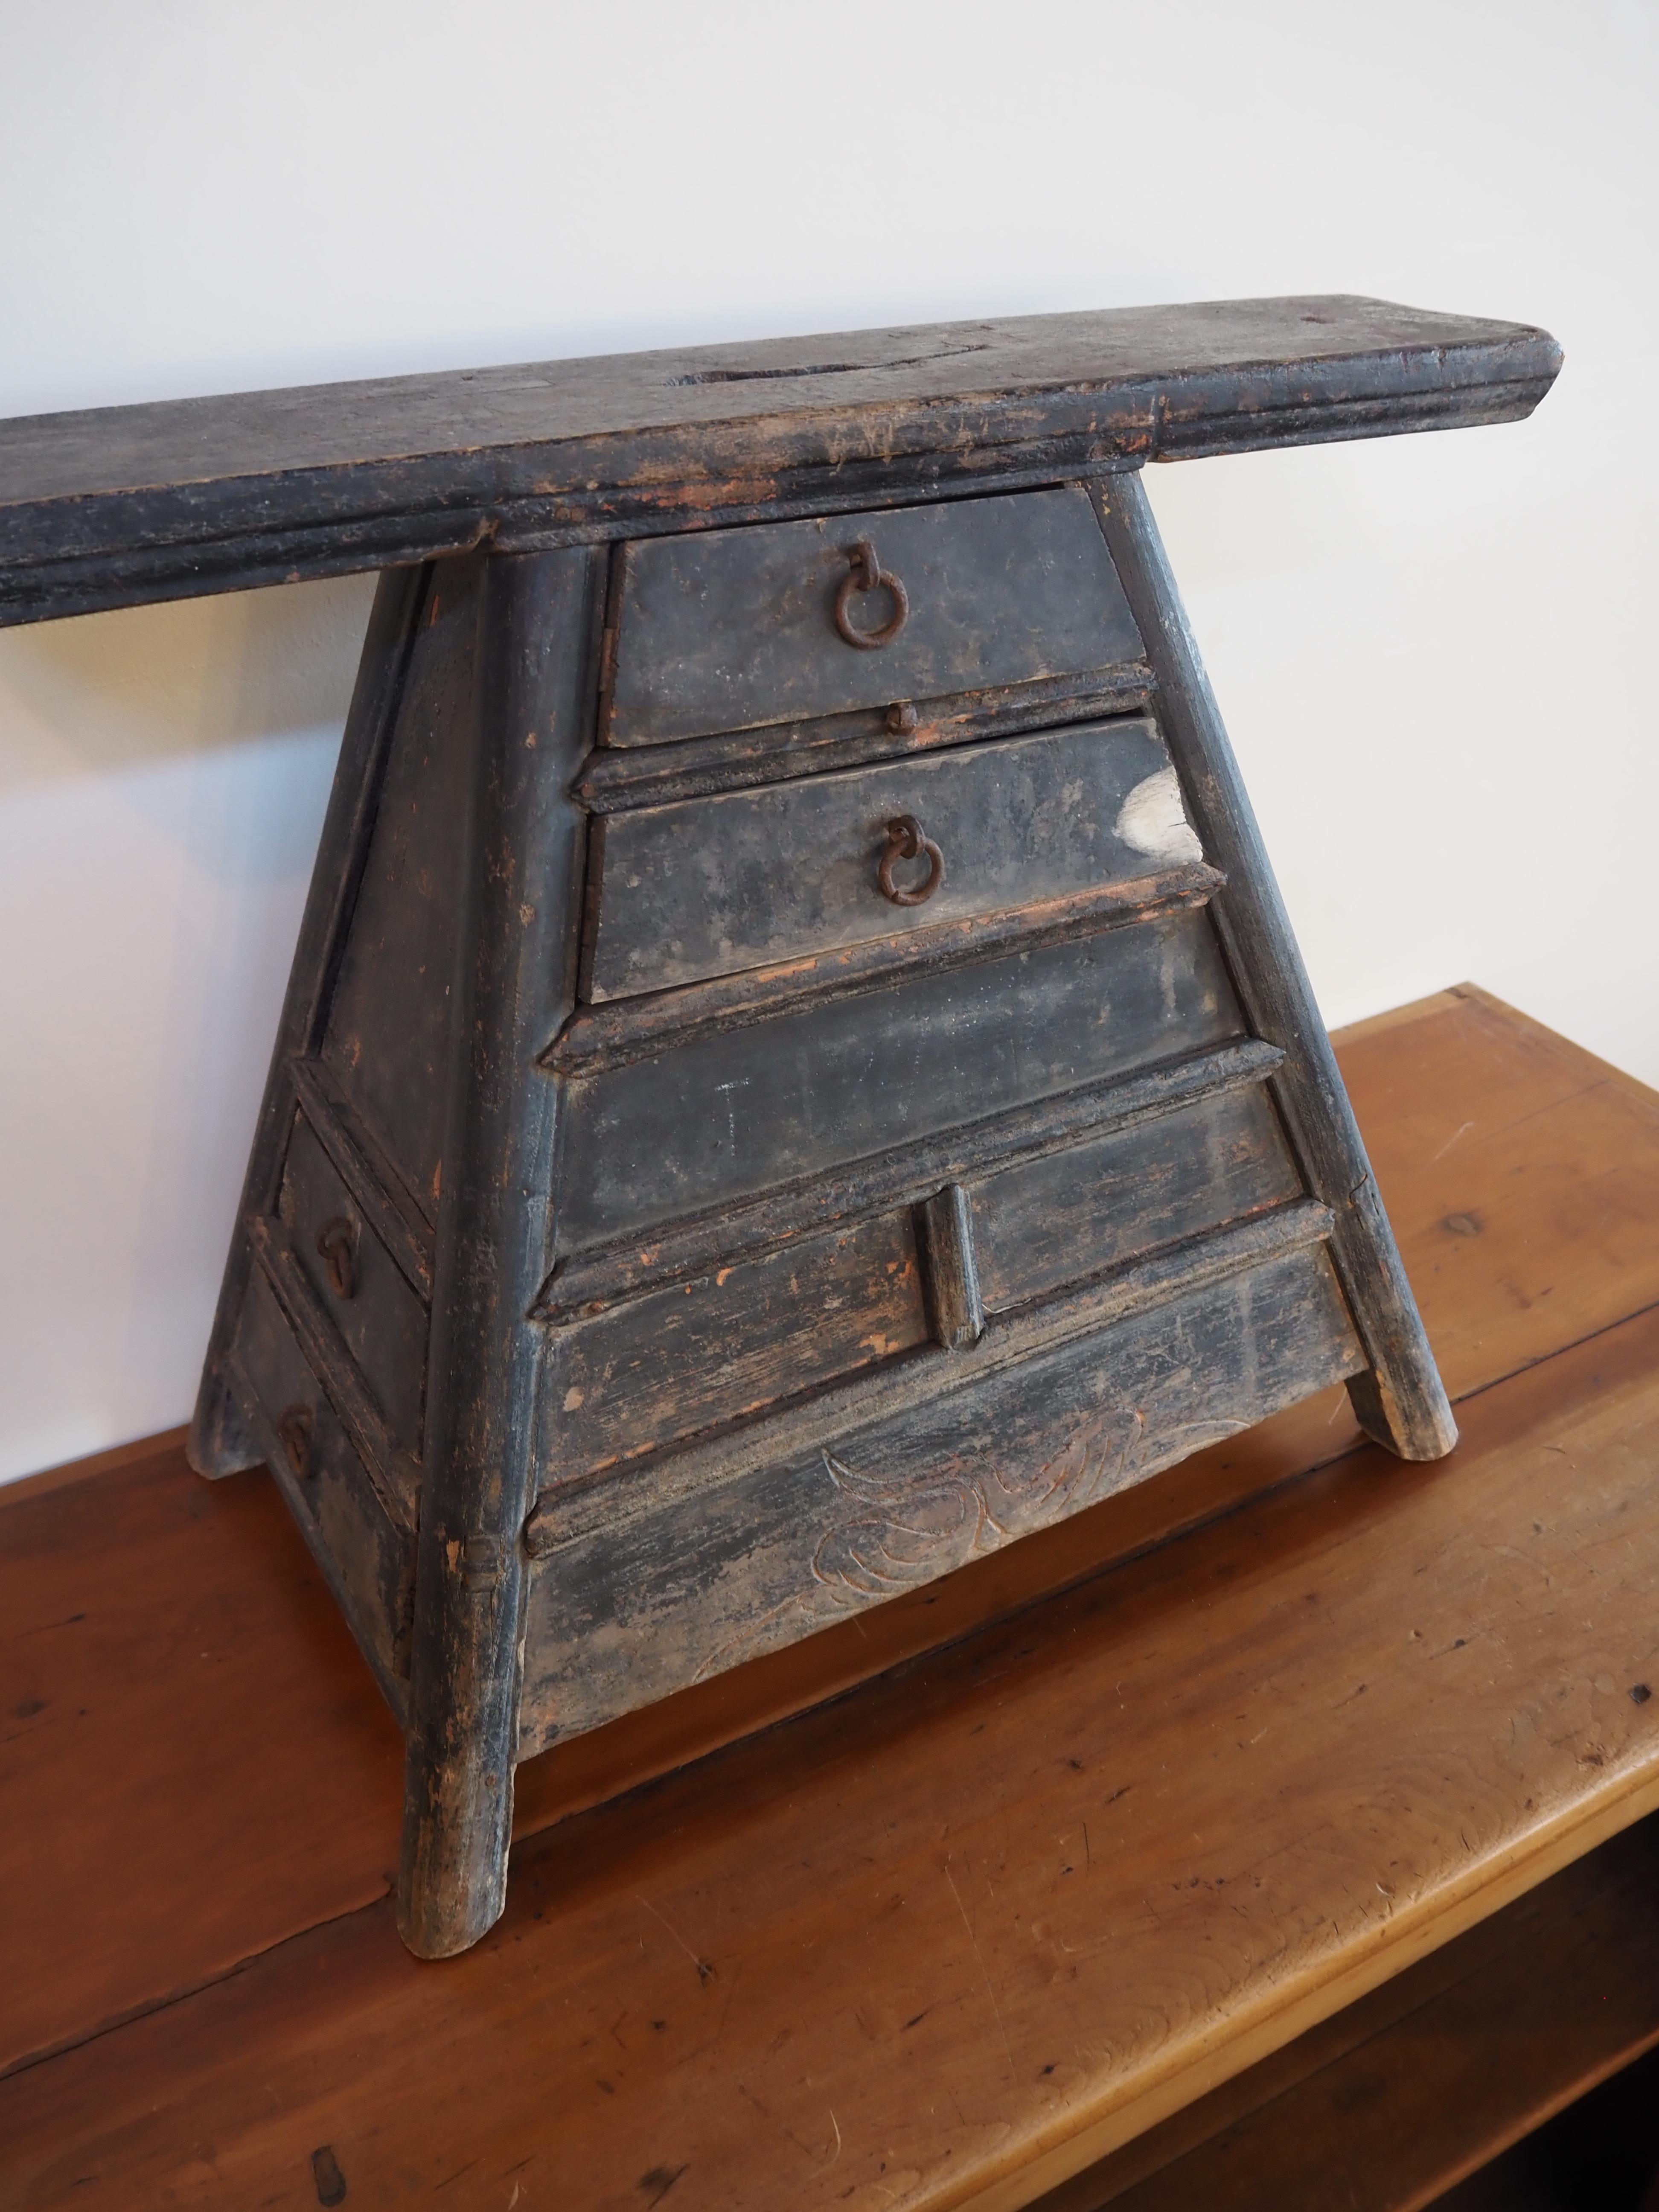 19th century Chinese barber stool in beautiful grey-blue. Hand carved detailing reminiscent of time and origin. Well-worn patina adds depth to every angle of this sculptural piece.

Two small drawers in the front and two small drawers on the side.